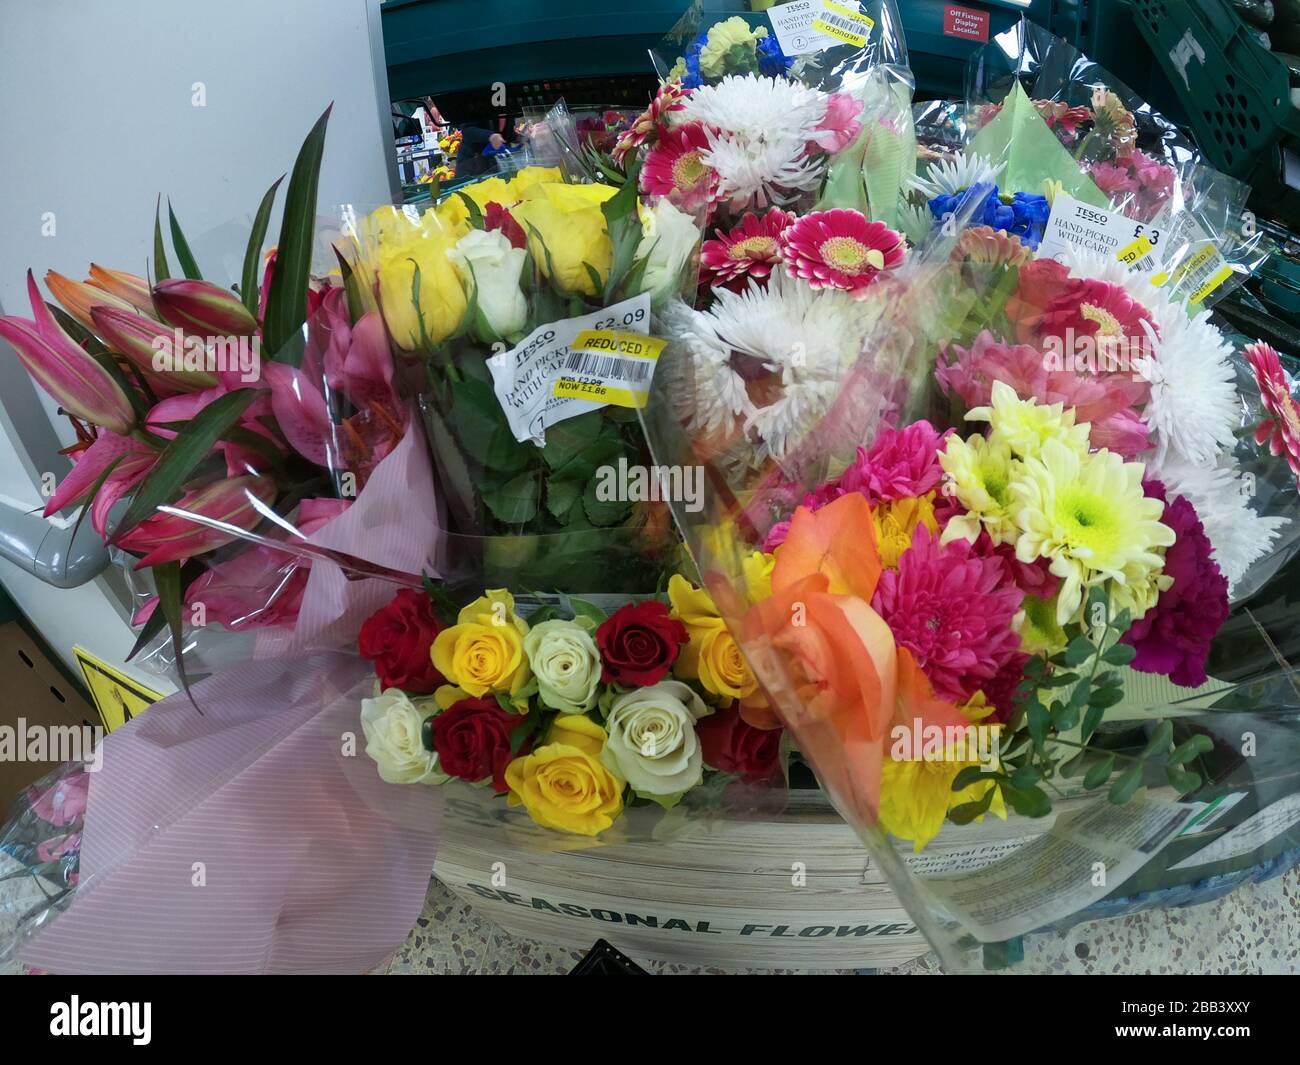 Reduced price flowers in Tesco supermarket. Unwanted flower bouquets in  shop during coronavirus crisis Stock Photo - Alamy